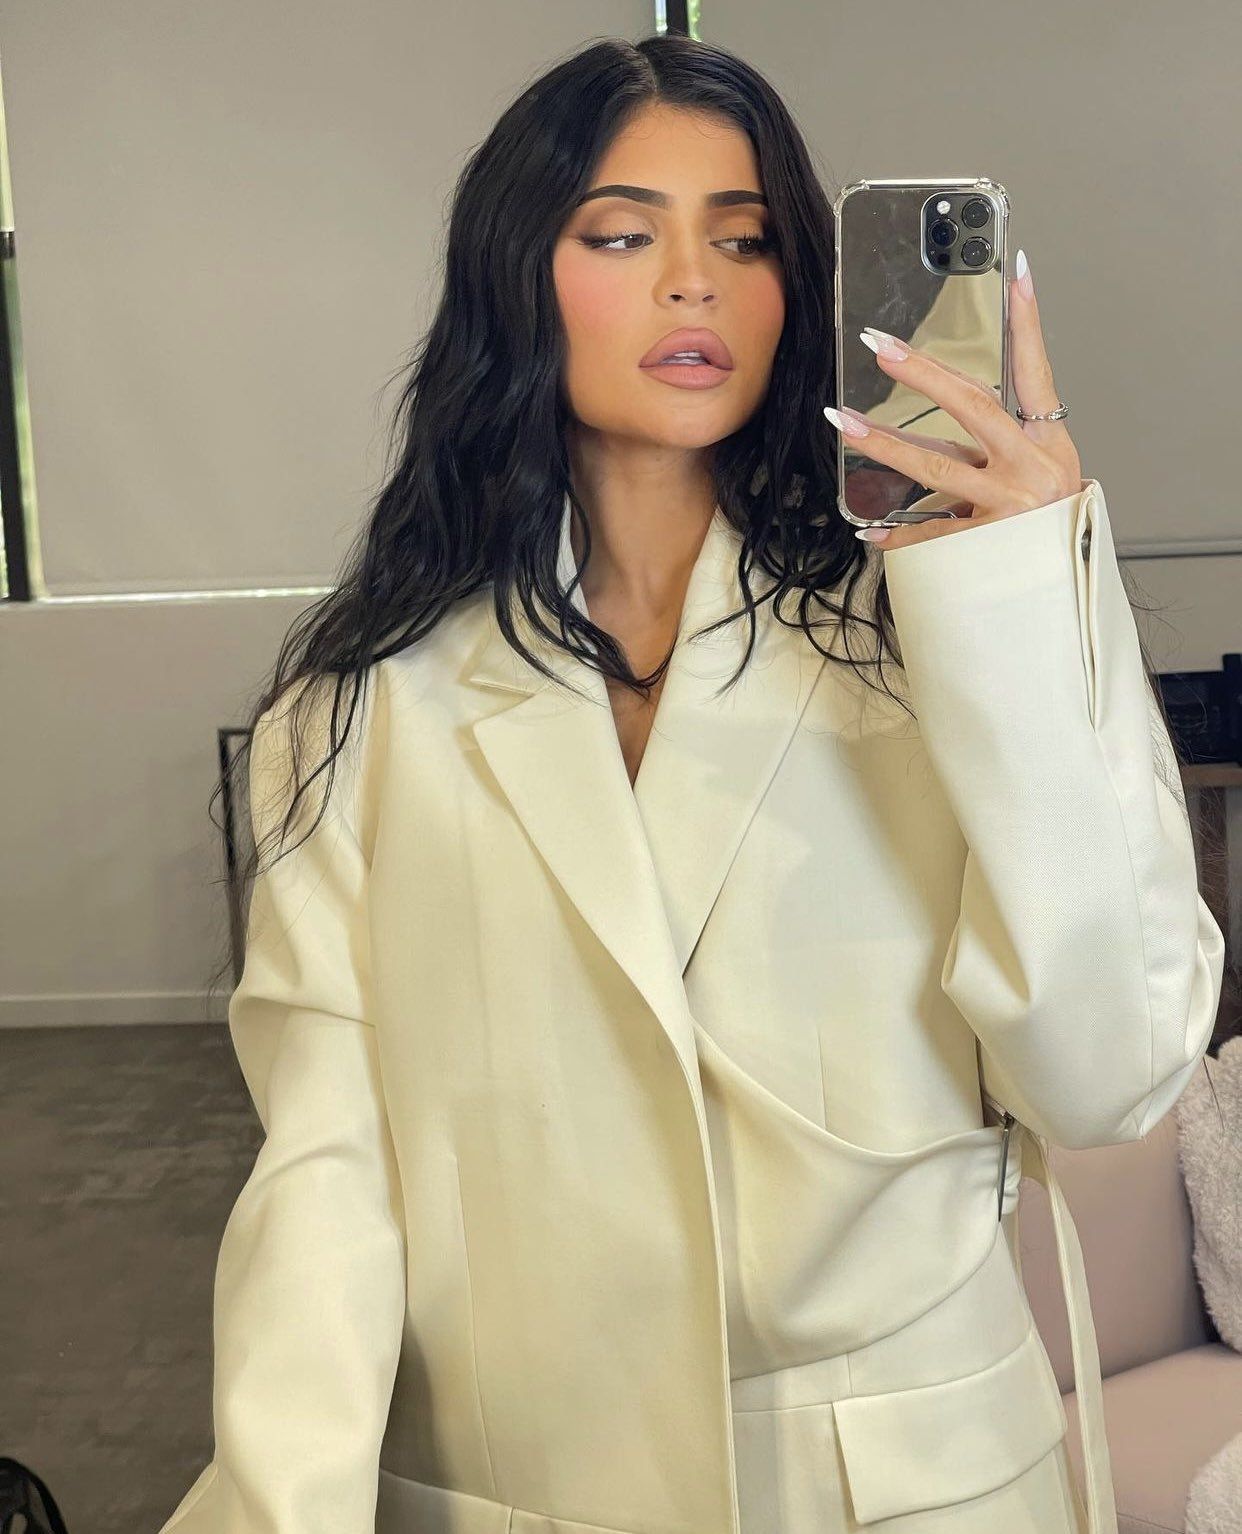 Kylie Jenner accidentally flashed a wedding ring, fans say